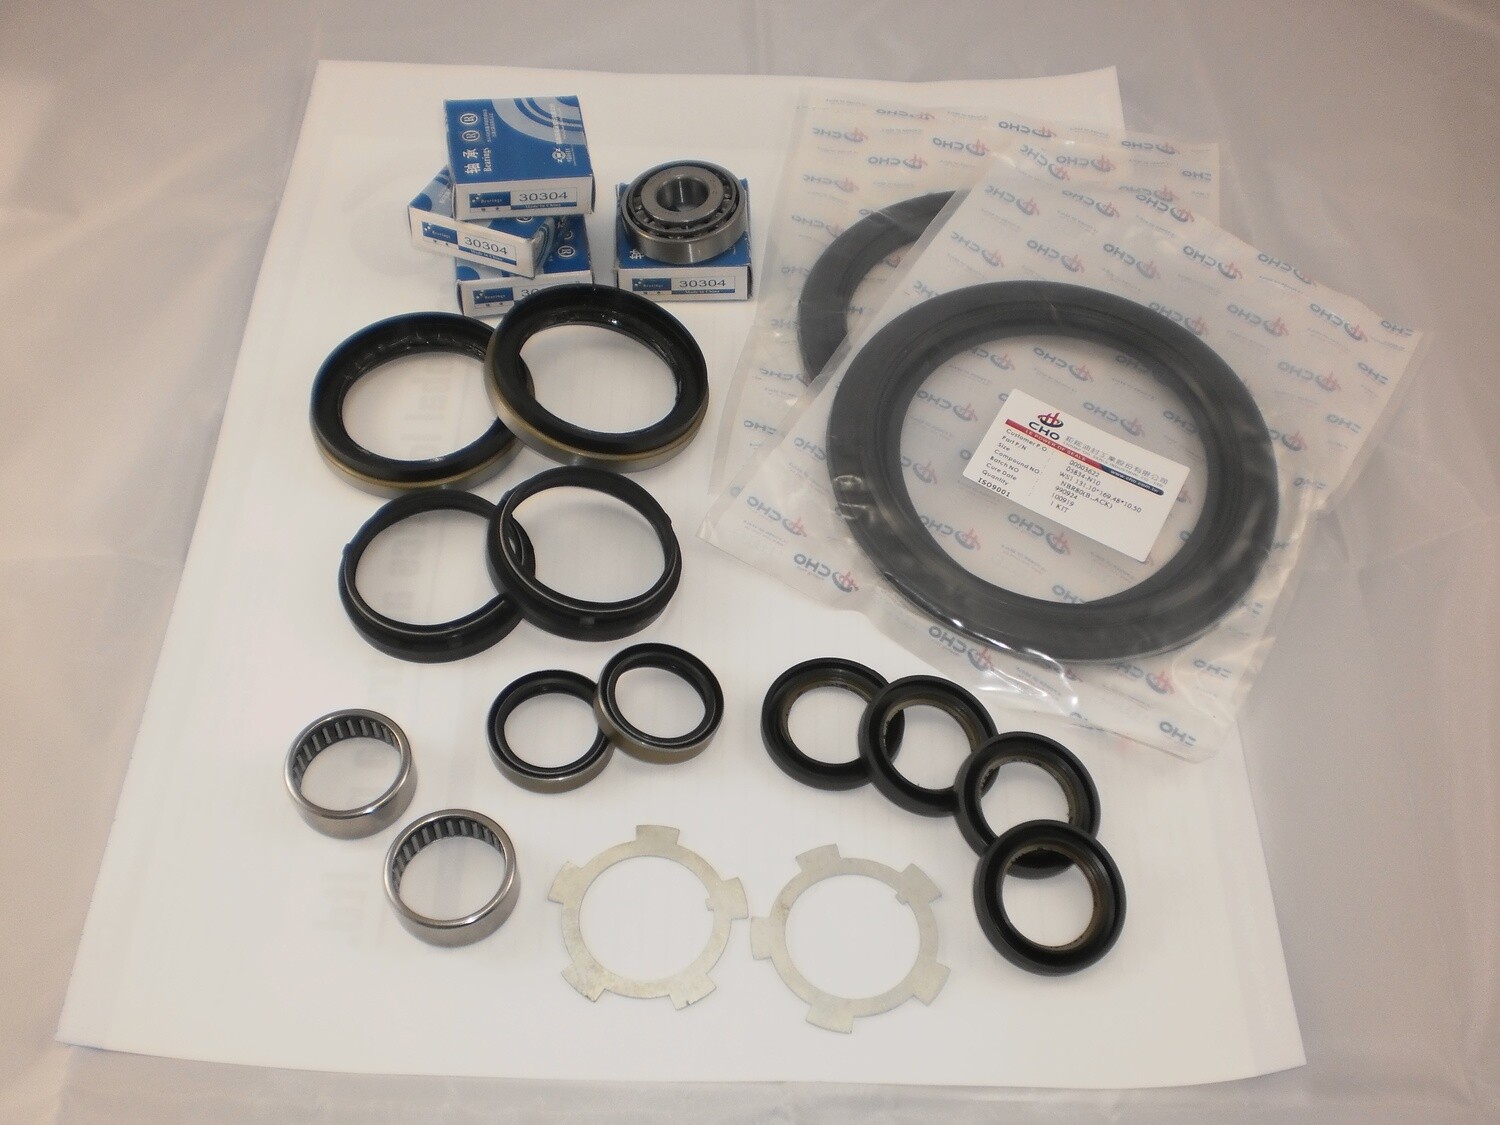 SWIVEL HUB KIT NISSAN PATROL GU WITH JAPANESE KING PIN ROLLER BEARING(INC.OIL SEAL) AND CHINESE NEEDLE ROLLER BEARING-INCLUDES EXTREME SEALS